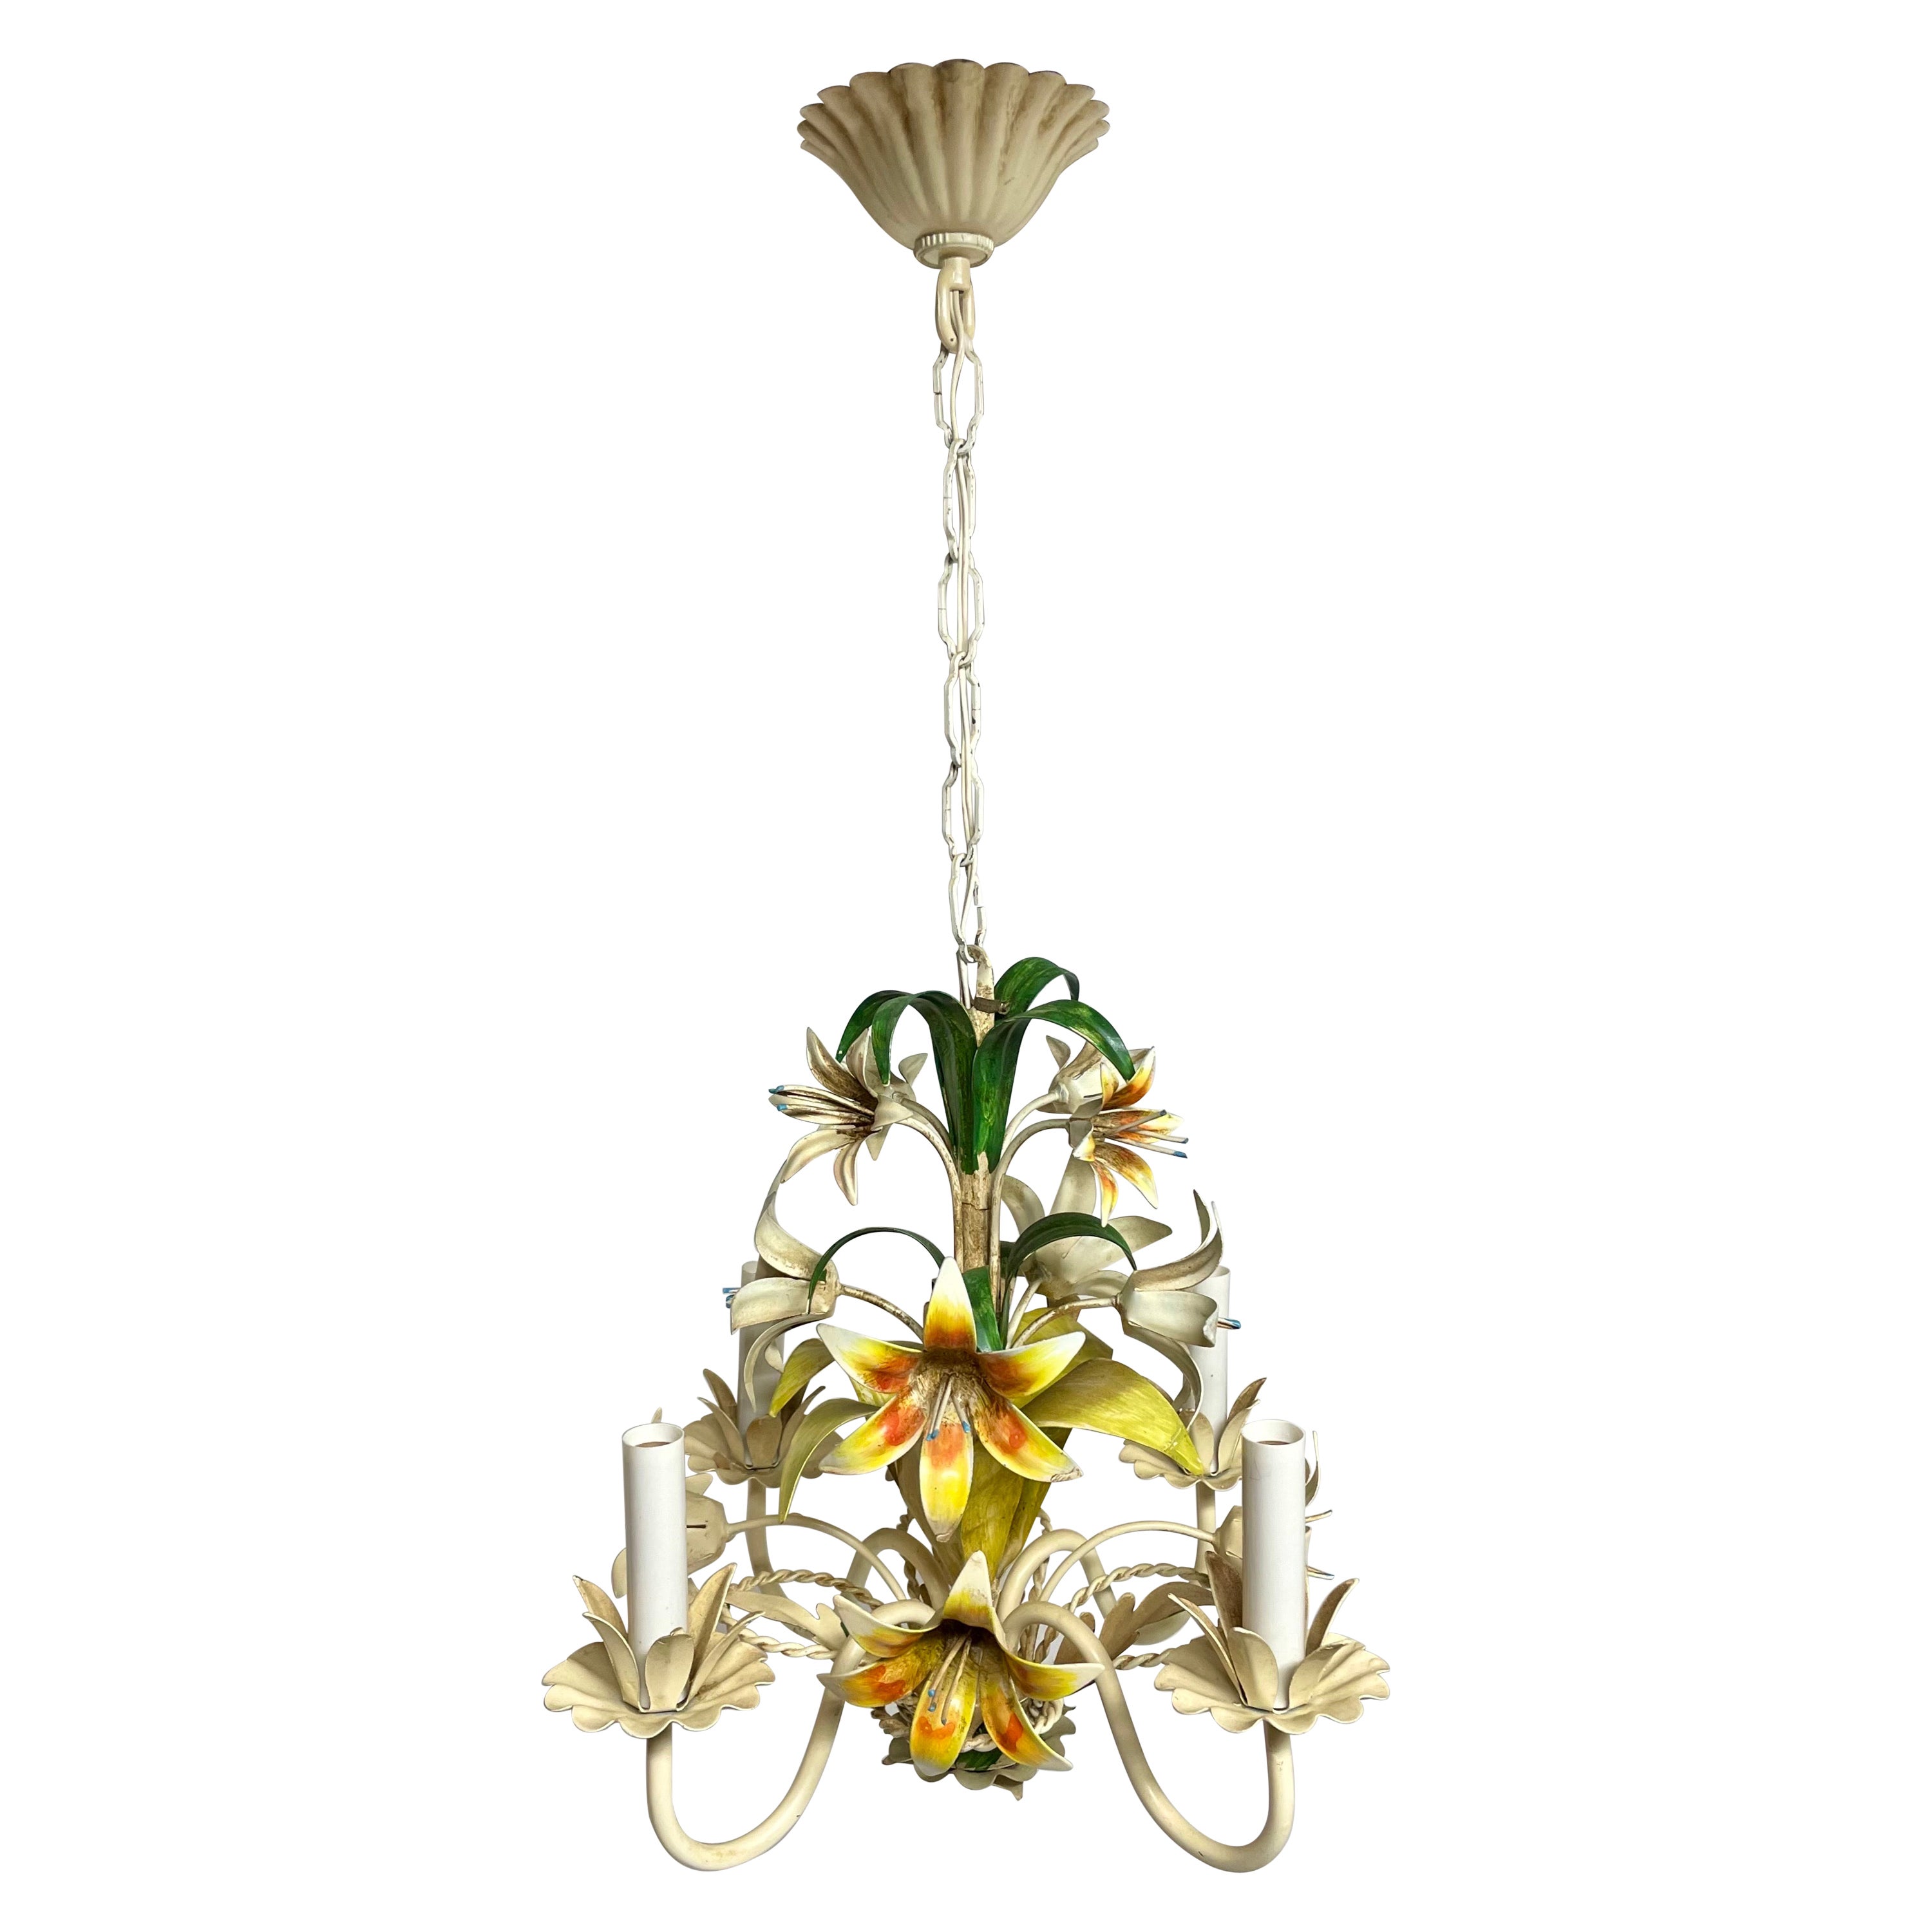 Italian Tole Floral Tole Chandelier with Lilies